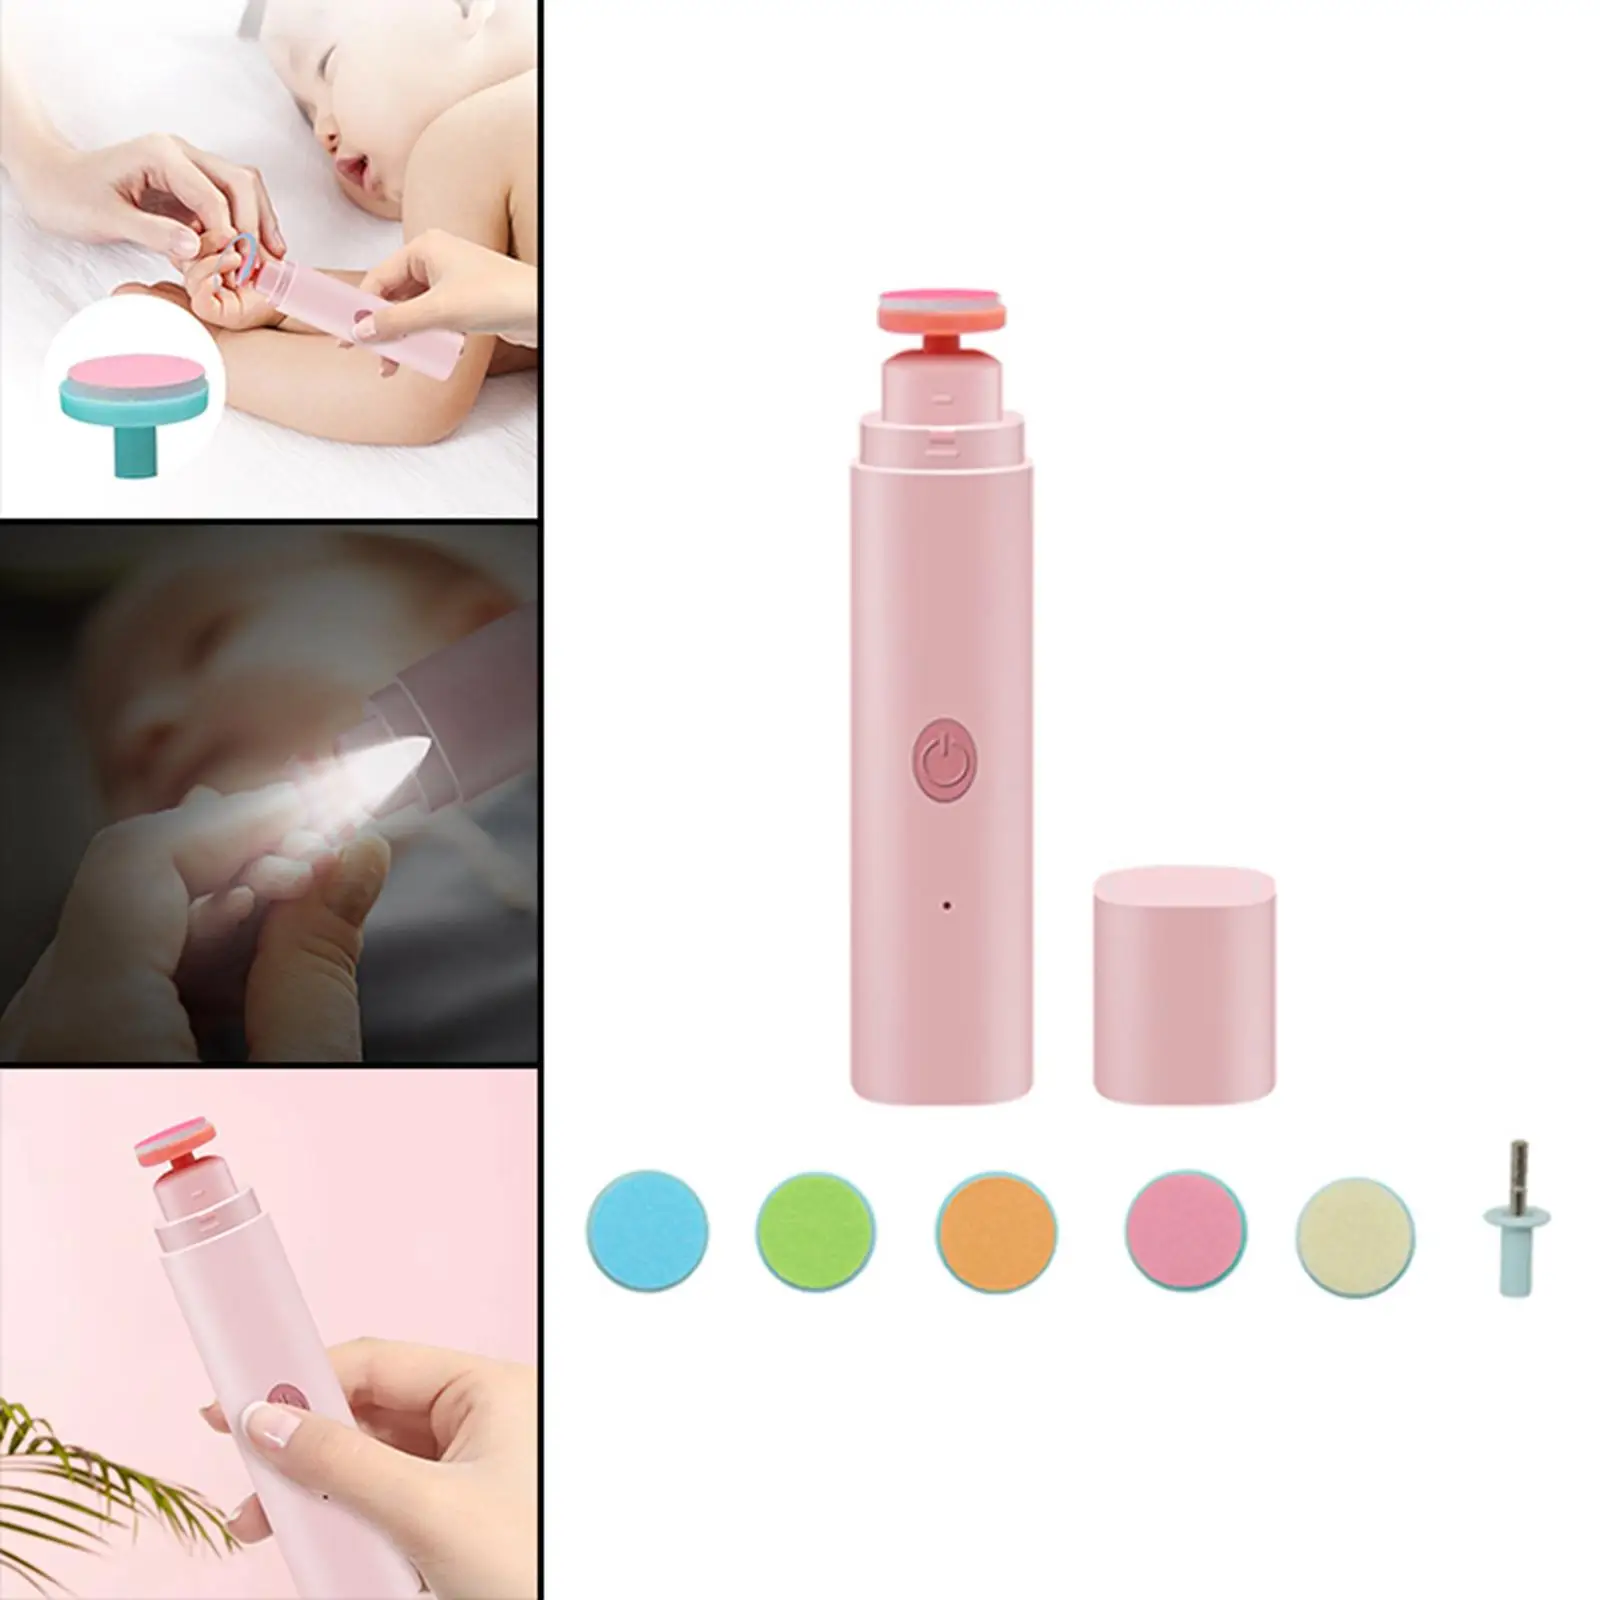 Baby Nail File Drill Polish Safety LED Light Trim Manicure Care Grooming 6 in 1 Clipper Cutter for Newborn Toes Fingers Infant